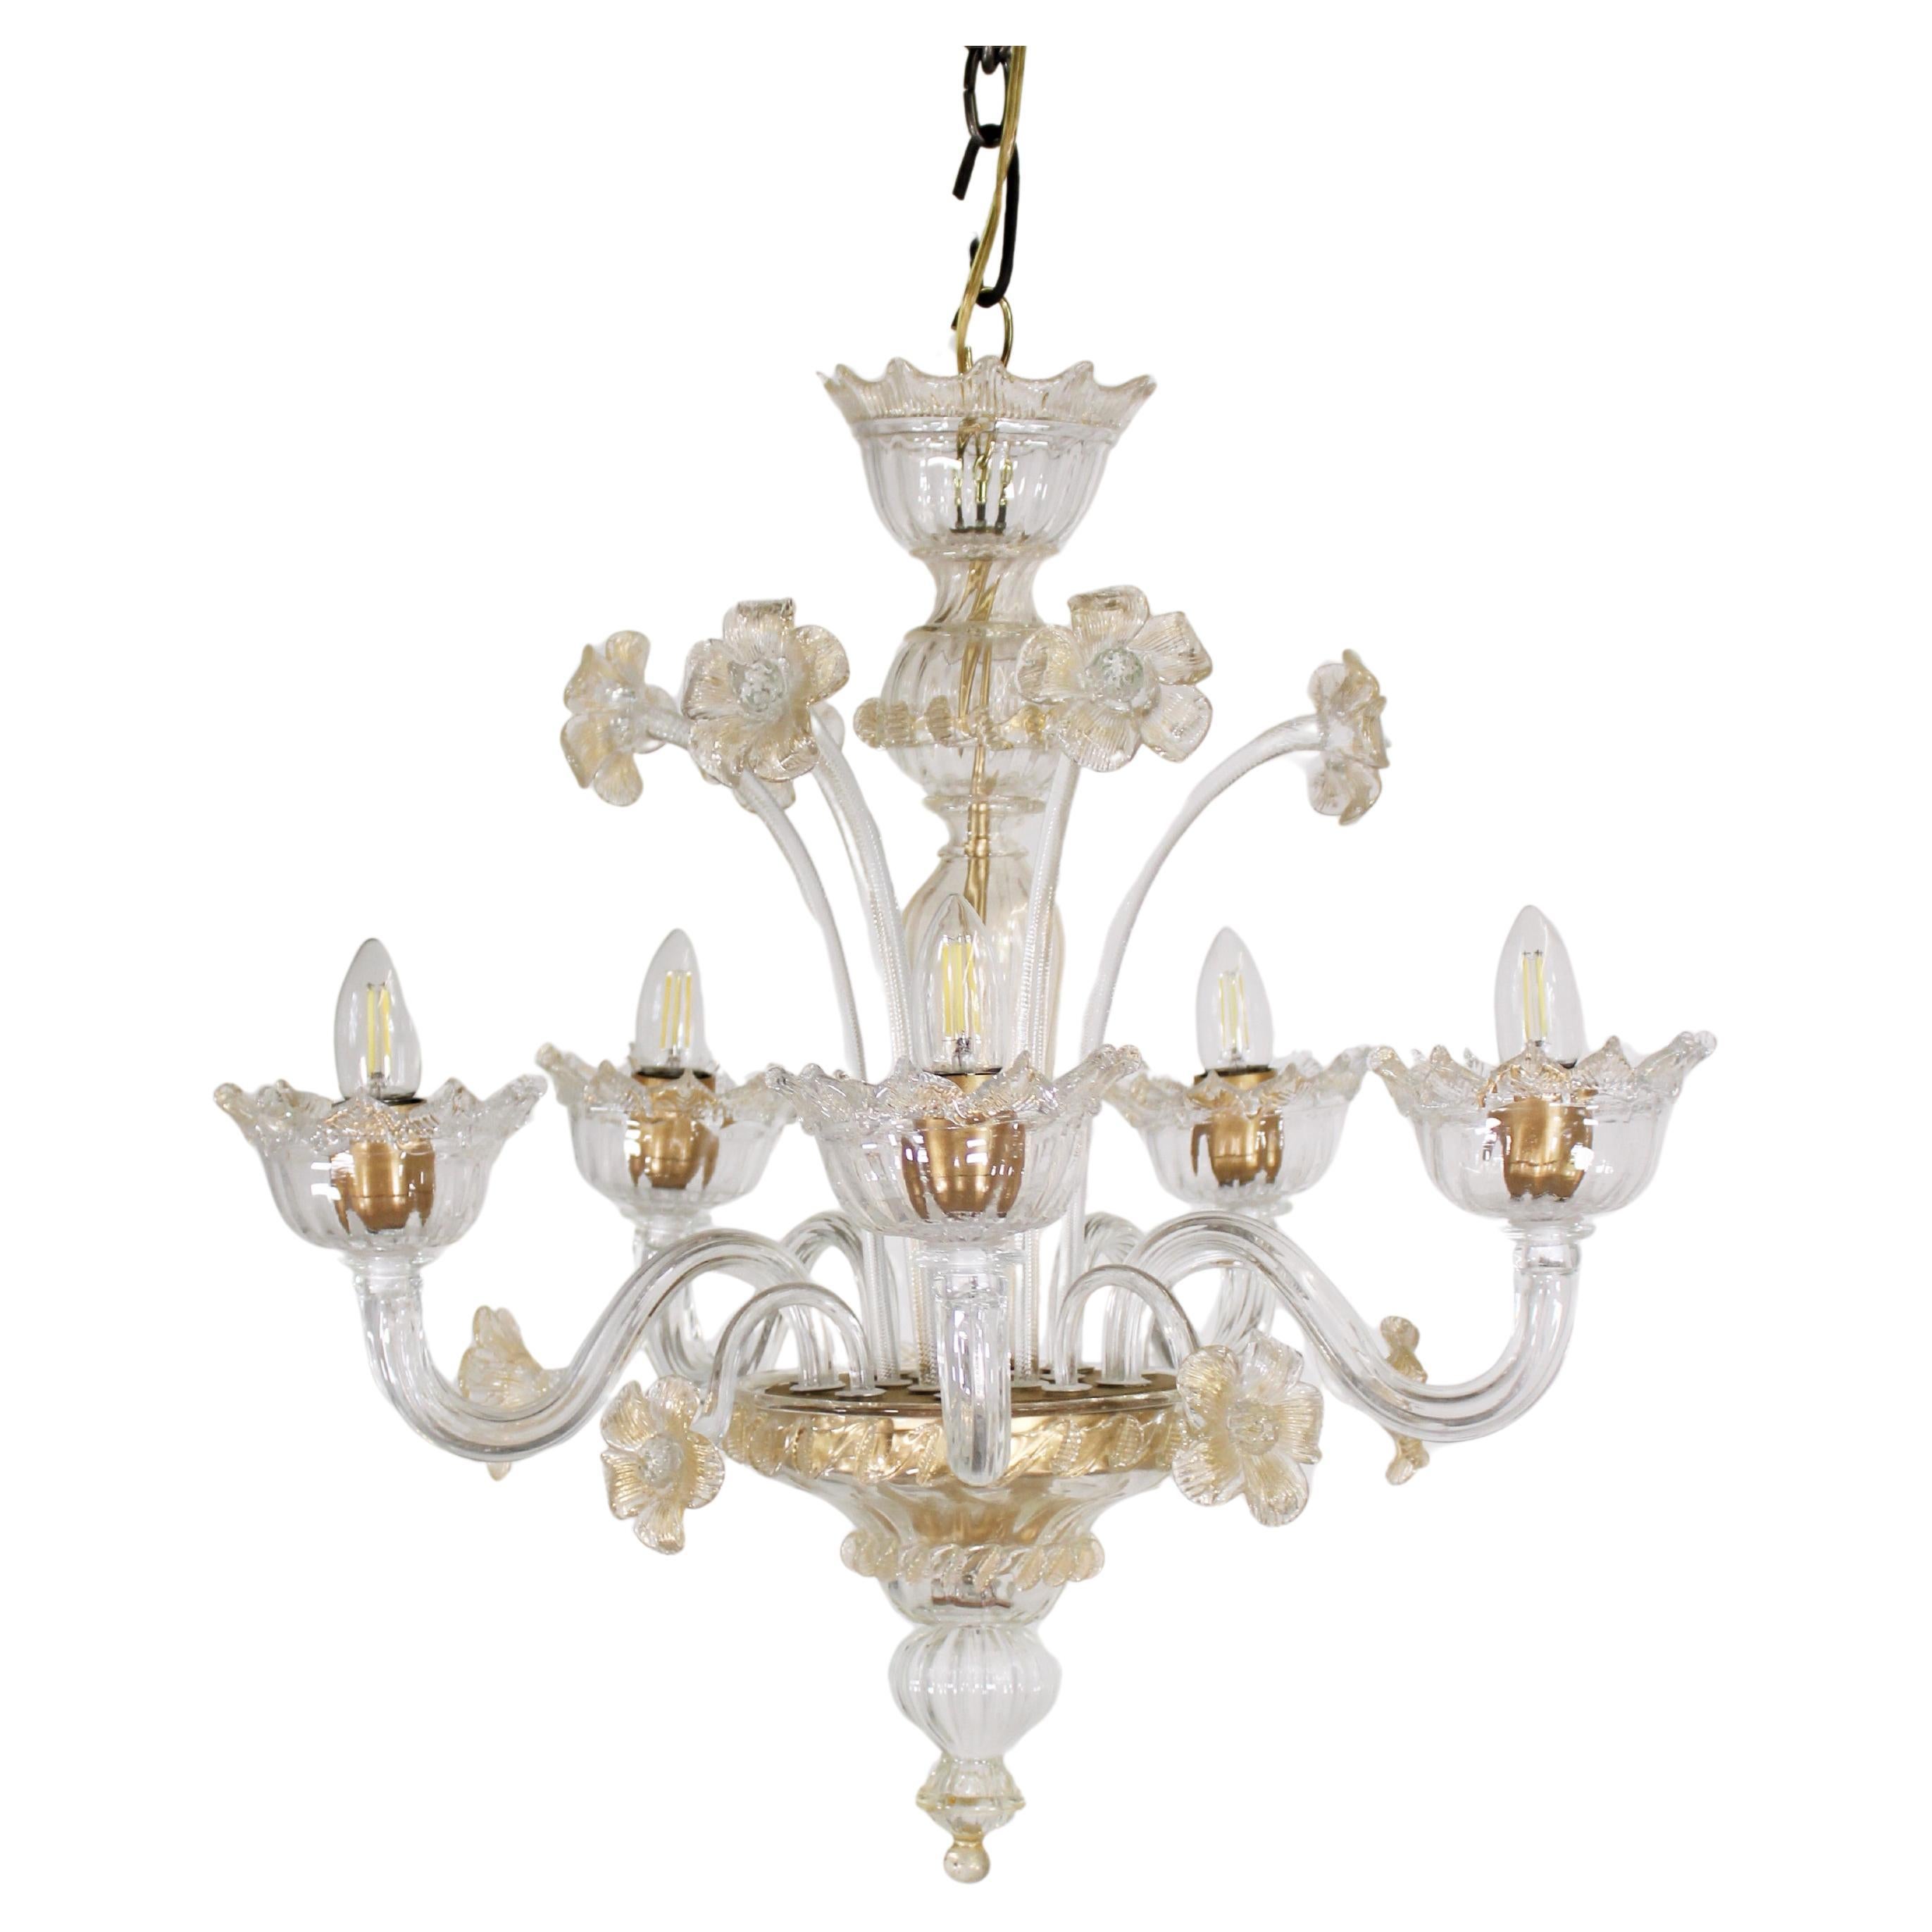 Vintage Baroque Style Five Arm Gold Infused Cristallo Murano Glass Chandelier